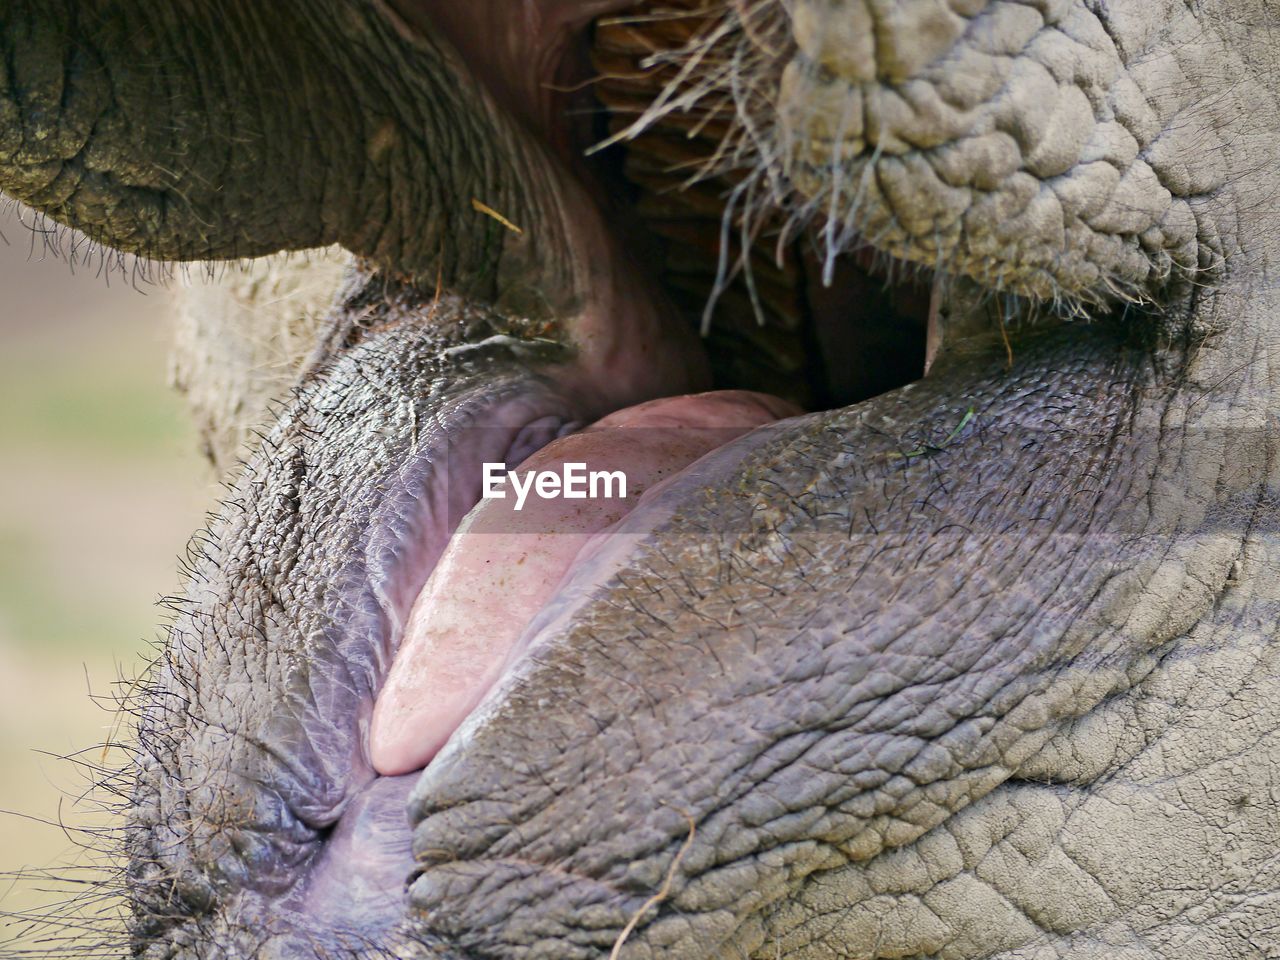 CLOSE-UP OF ELEPHANT IN A ANIMAL